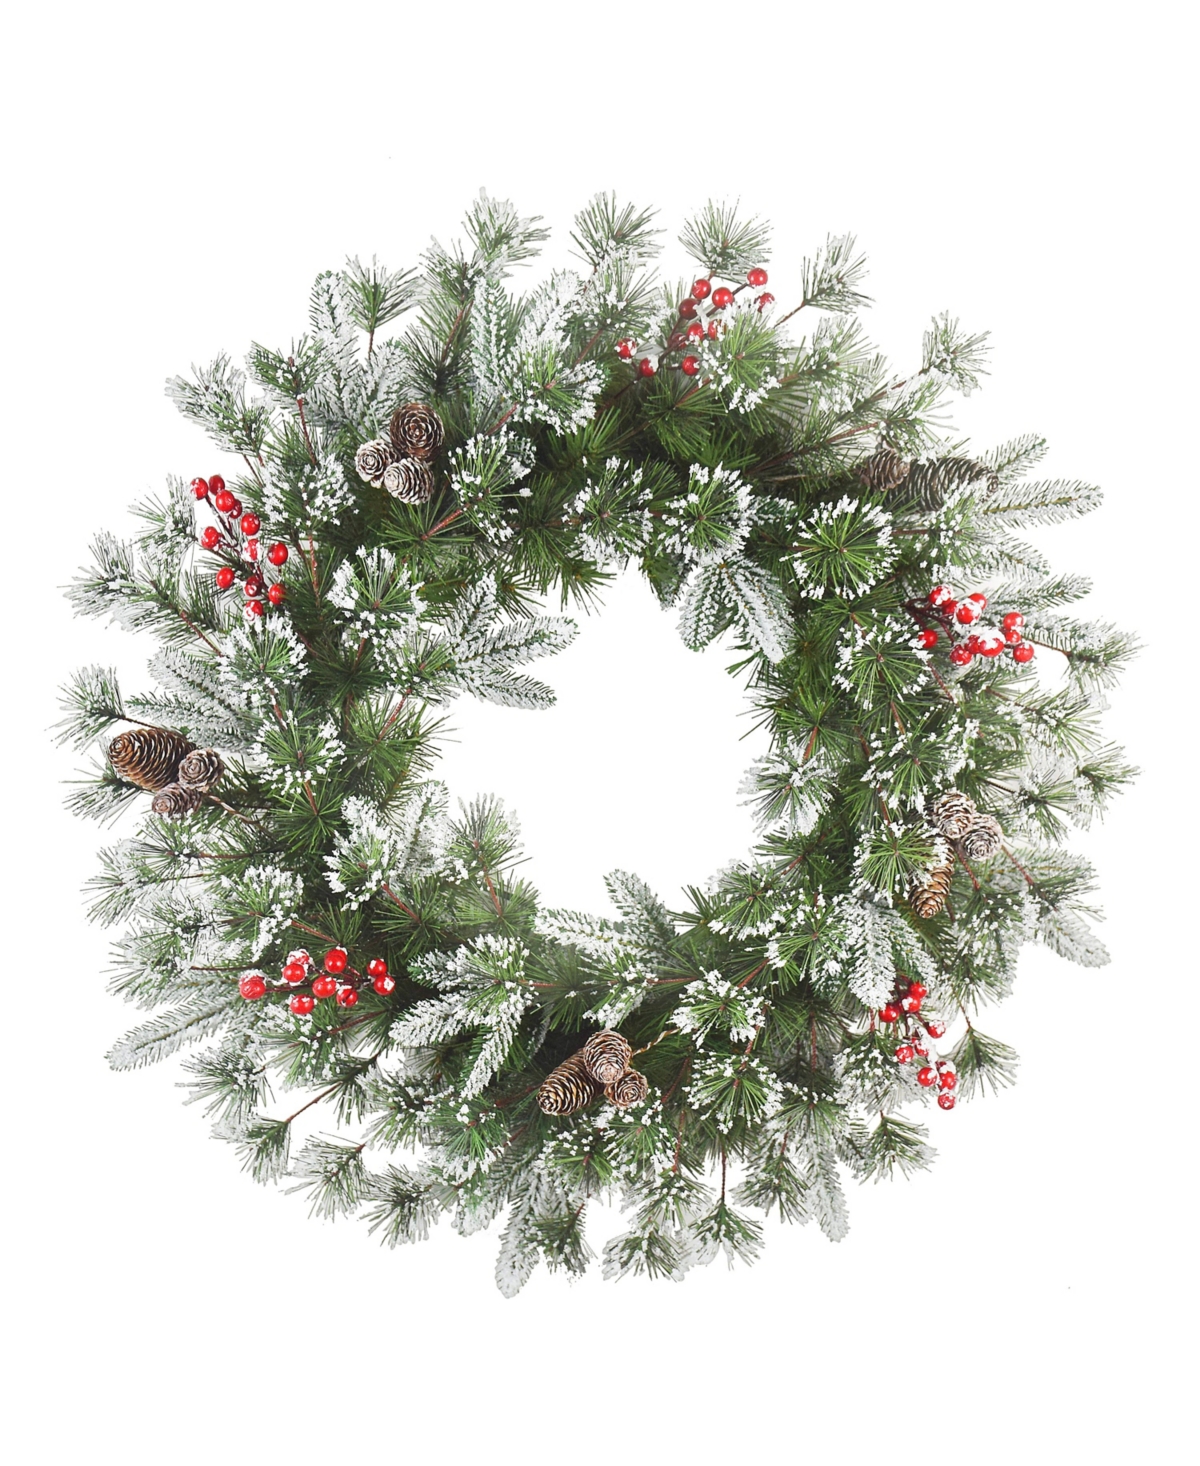 Puleo 24" Decorated Wreath With Pine Cones Berries, 200 Tips In Green